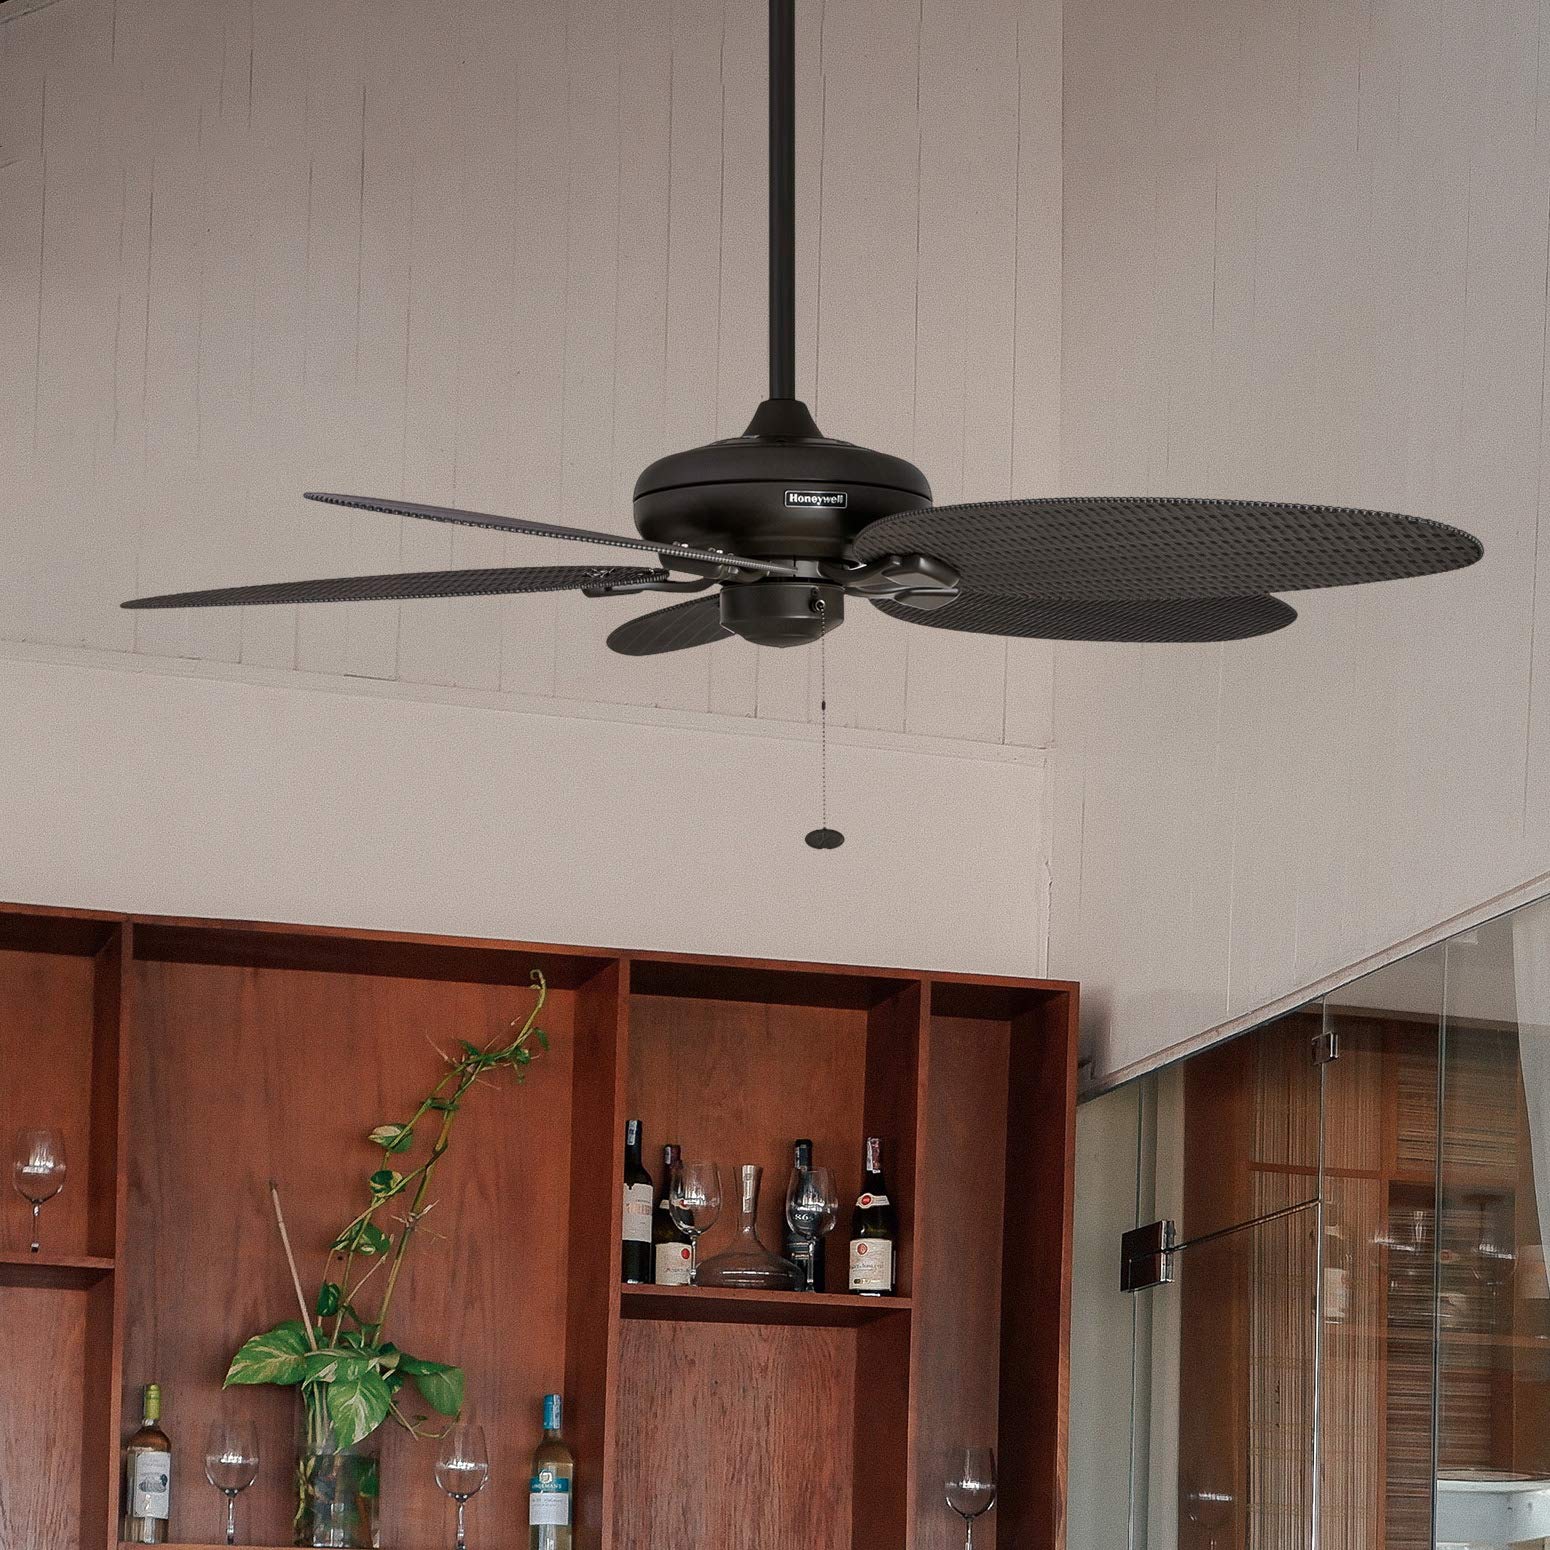 Honeywell Ceiling Fans Duval - 52-in Tri Mount Fan with Pull Chain - Indoor Outdoor Ceiling Fan - No Light - Damp Rated Tropical Room Fan with Wicker Style Blades - Model 50201 (Bronze)